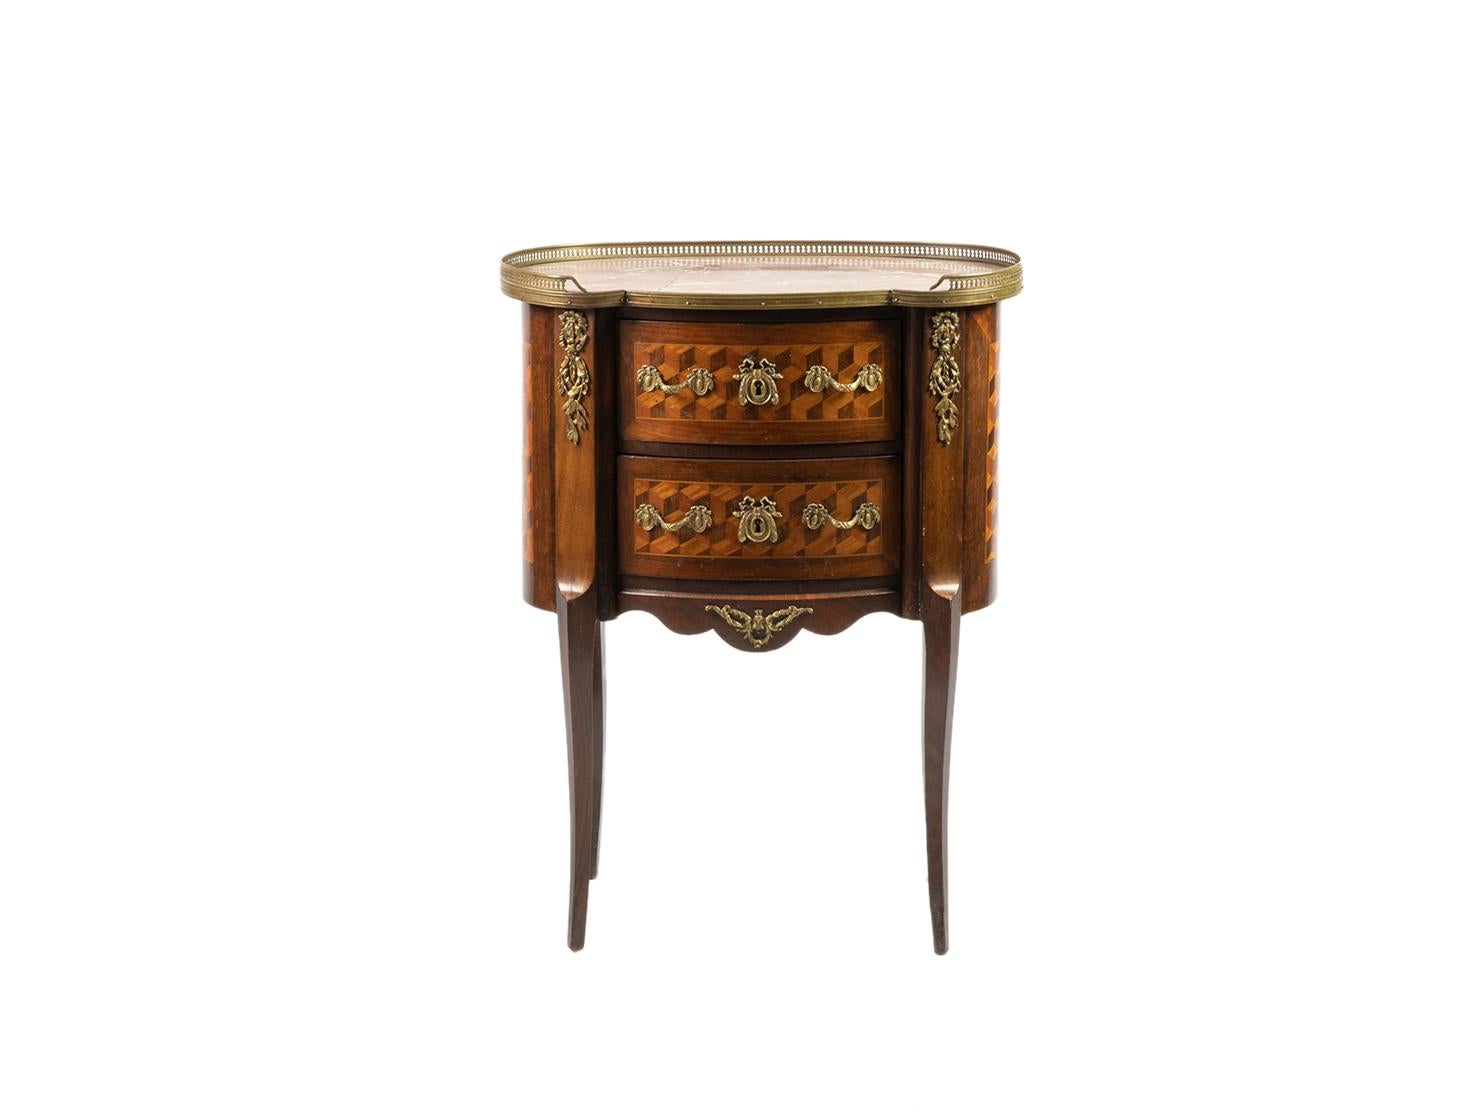 An oval shaped commode, a bedside type piece in transition between Louis XV and Louis XVI style.
Rosewood and Pau-rosa, three drawers, exquisite marquetry, gilded bronze hardware and friezes. 
With metal upper railings and inlaid pink Cedar Marble